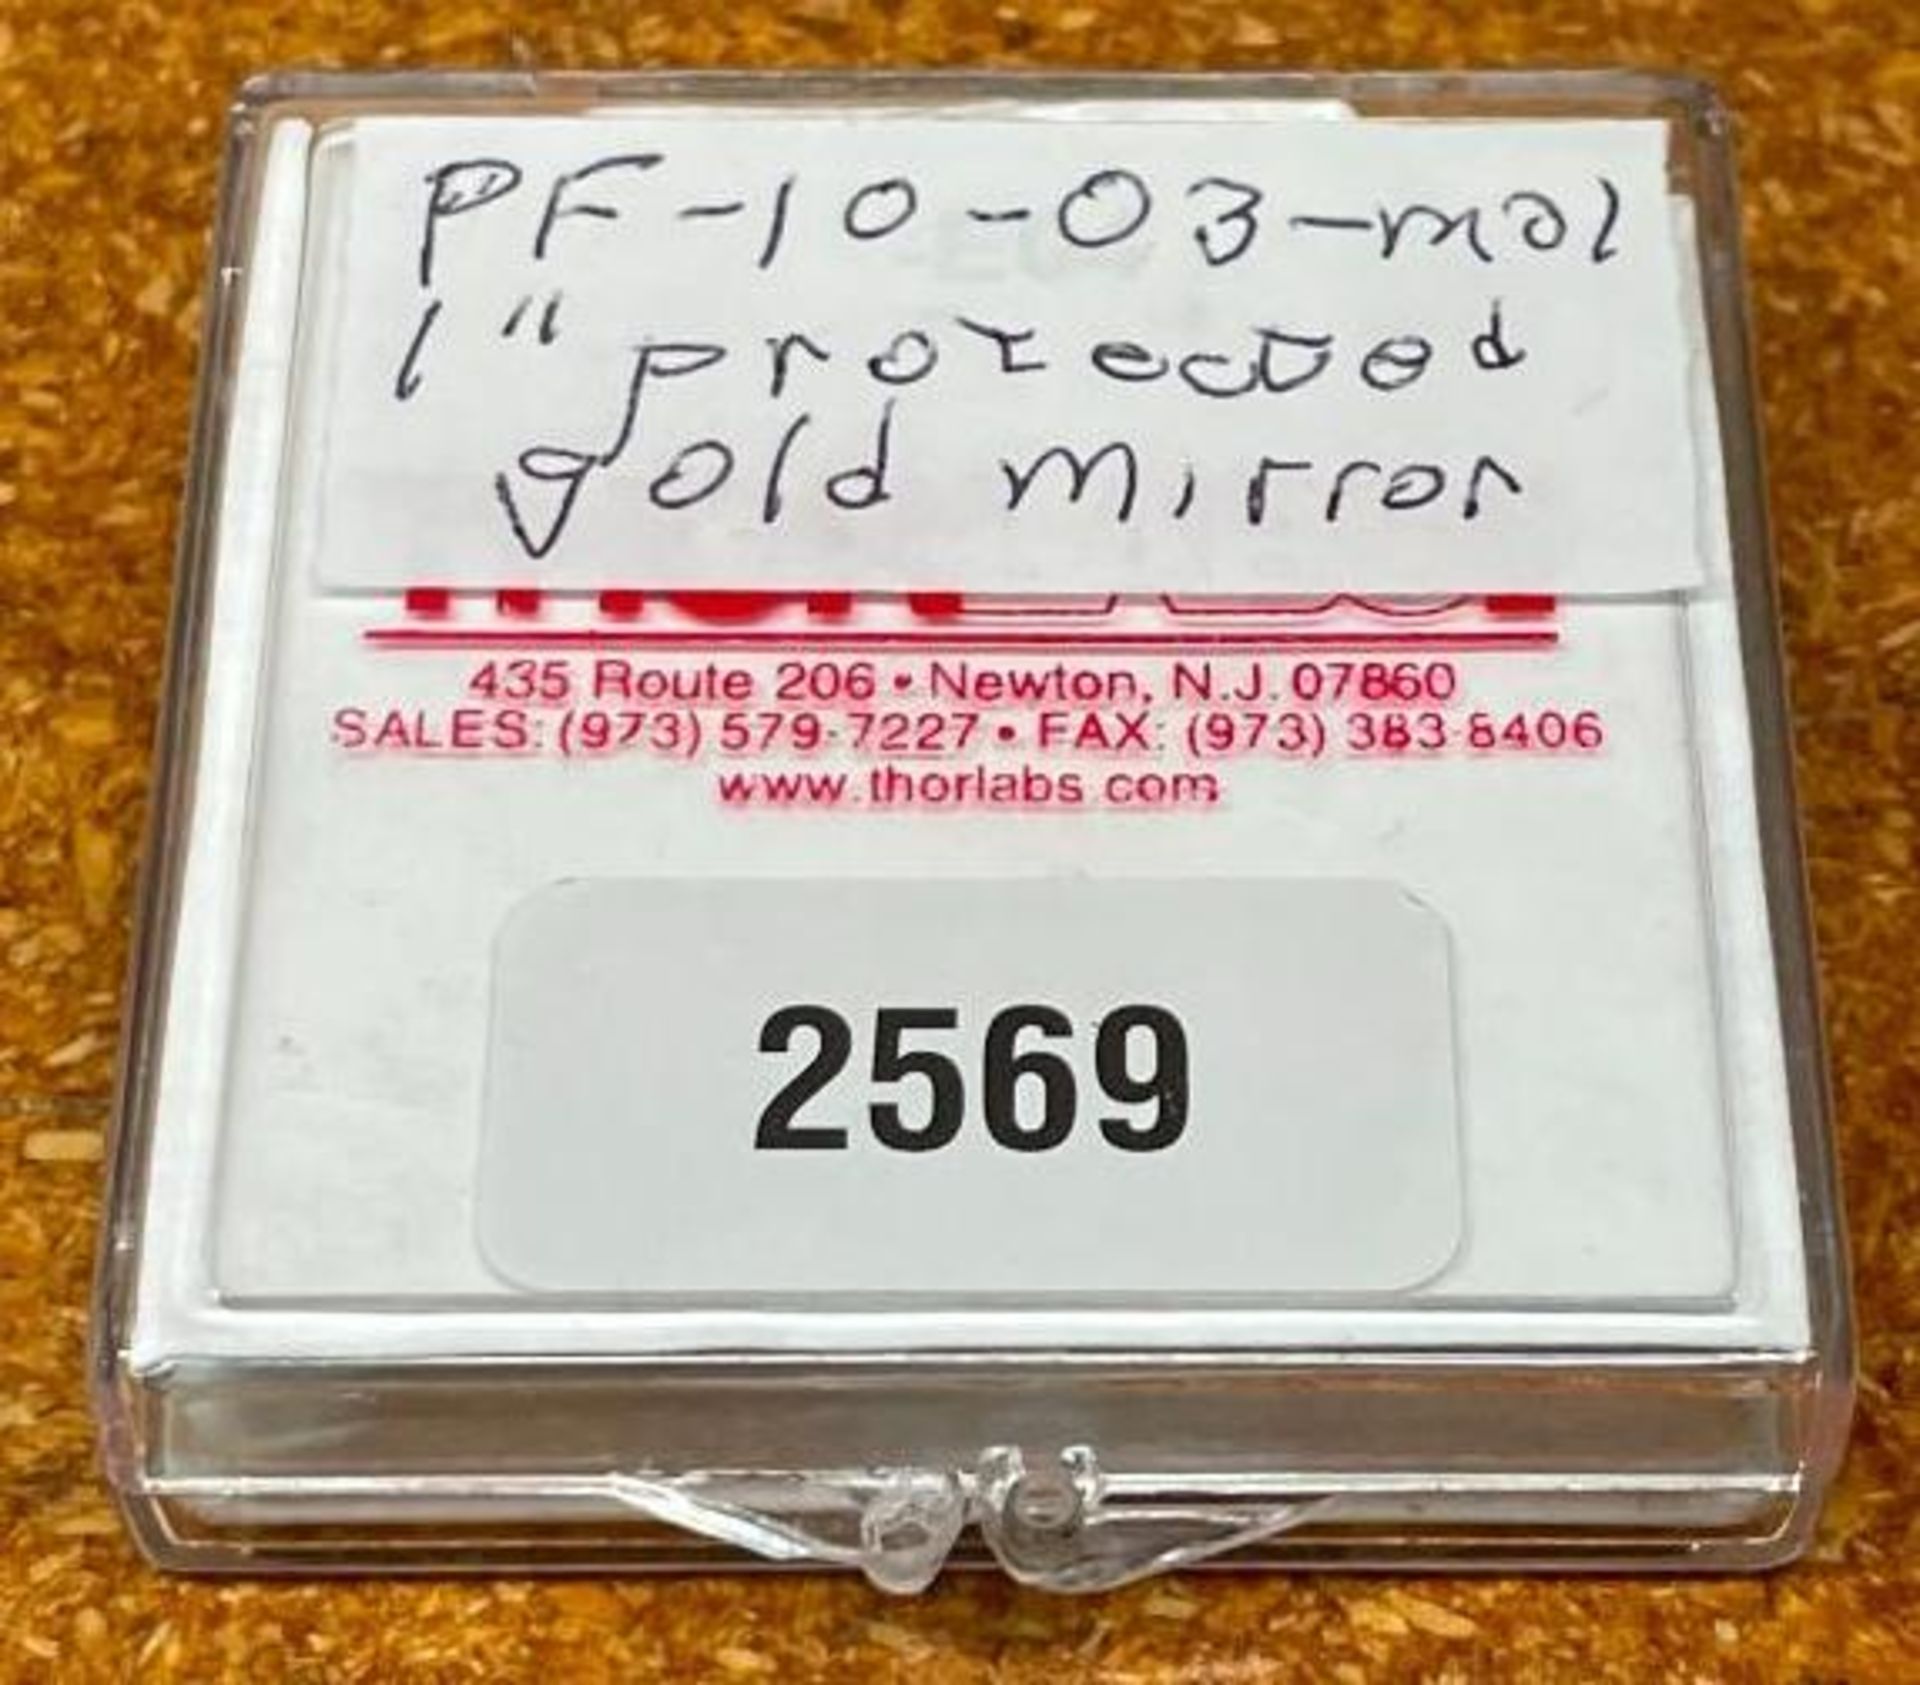 1" PROTECTED GOLD MIRROR BRAND/MODEL: THORLABS PF-10-03-M01 RETAIL$: $106 ORIGINAL RETAIL QTY: 1 - Image 2 of 2